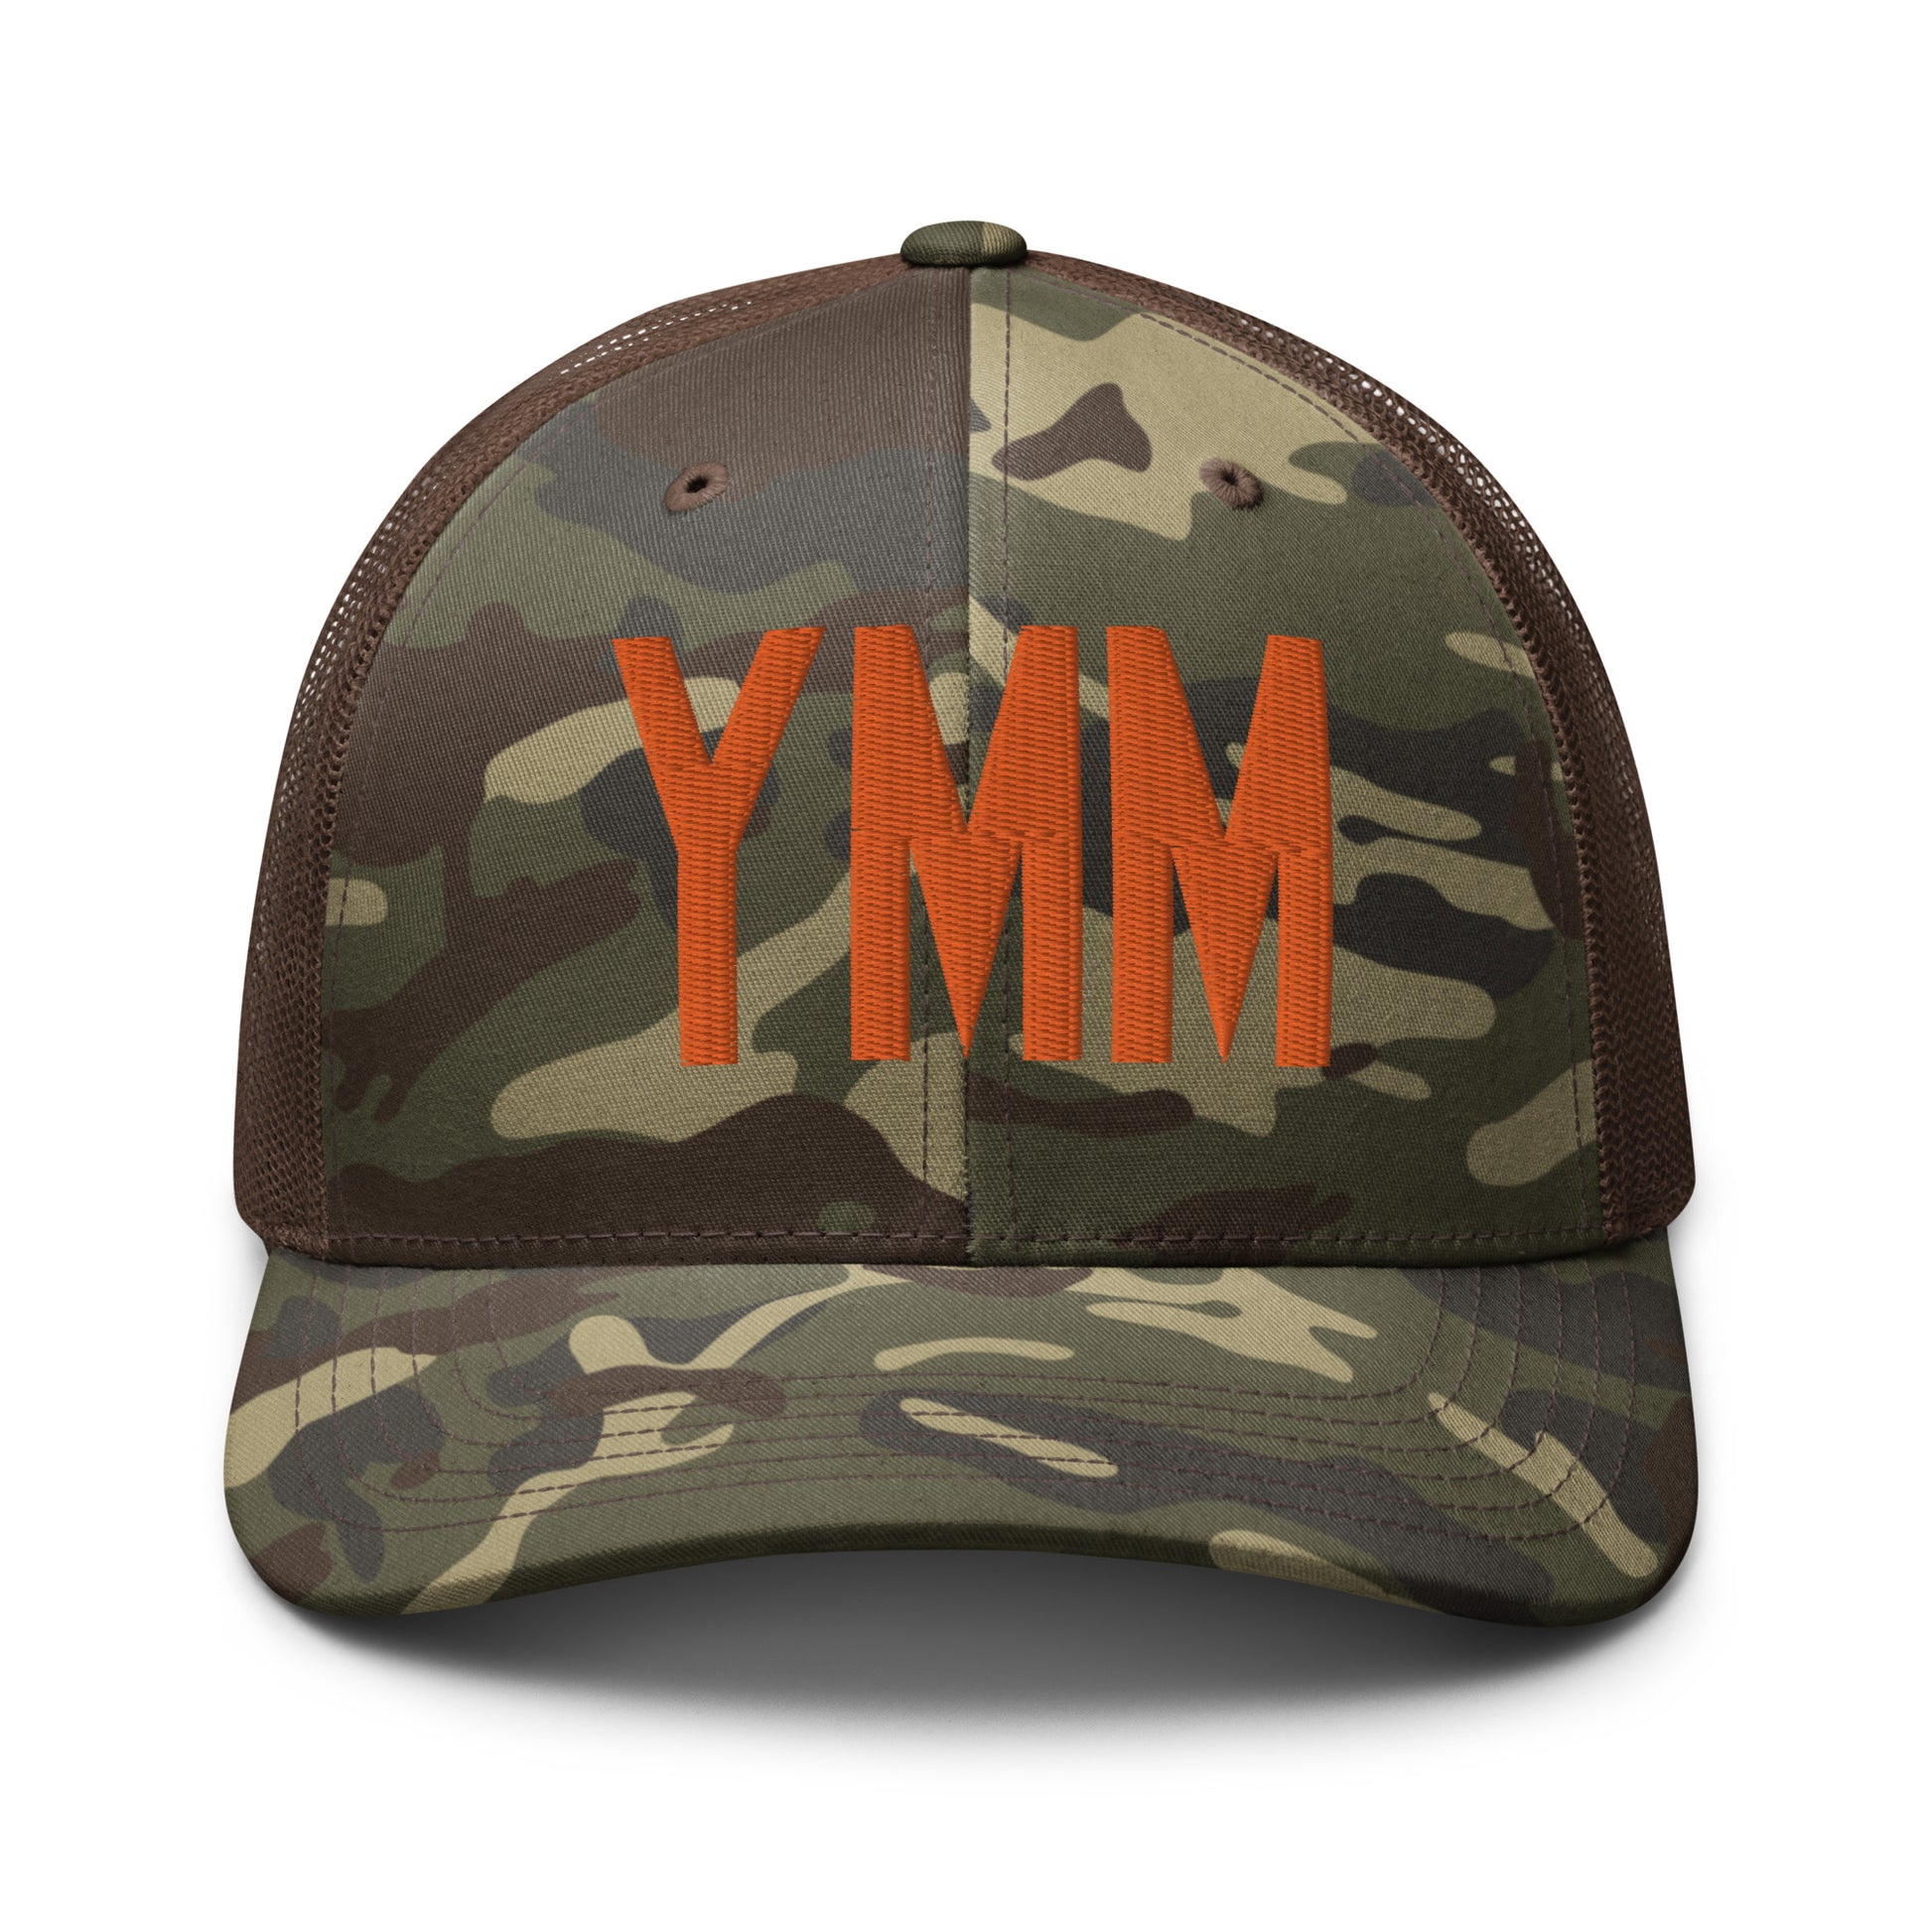 Airport Code Camouflage Trucker Hat - Orange • YMM Fort McMurray • YHM Designs - Image 13